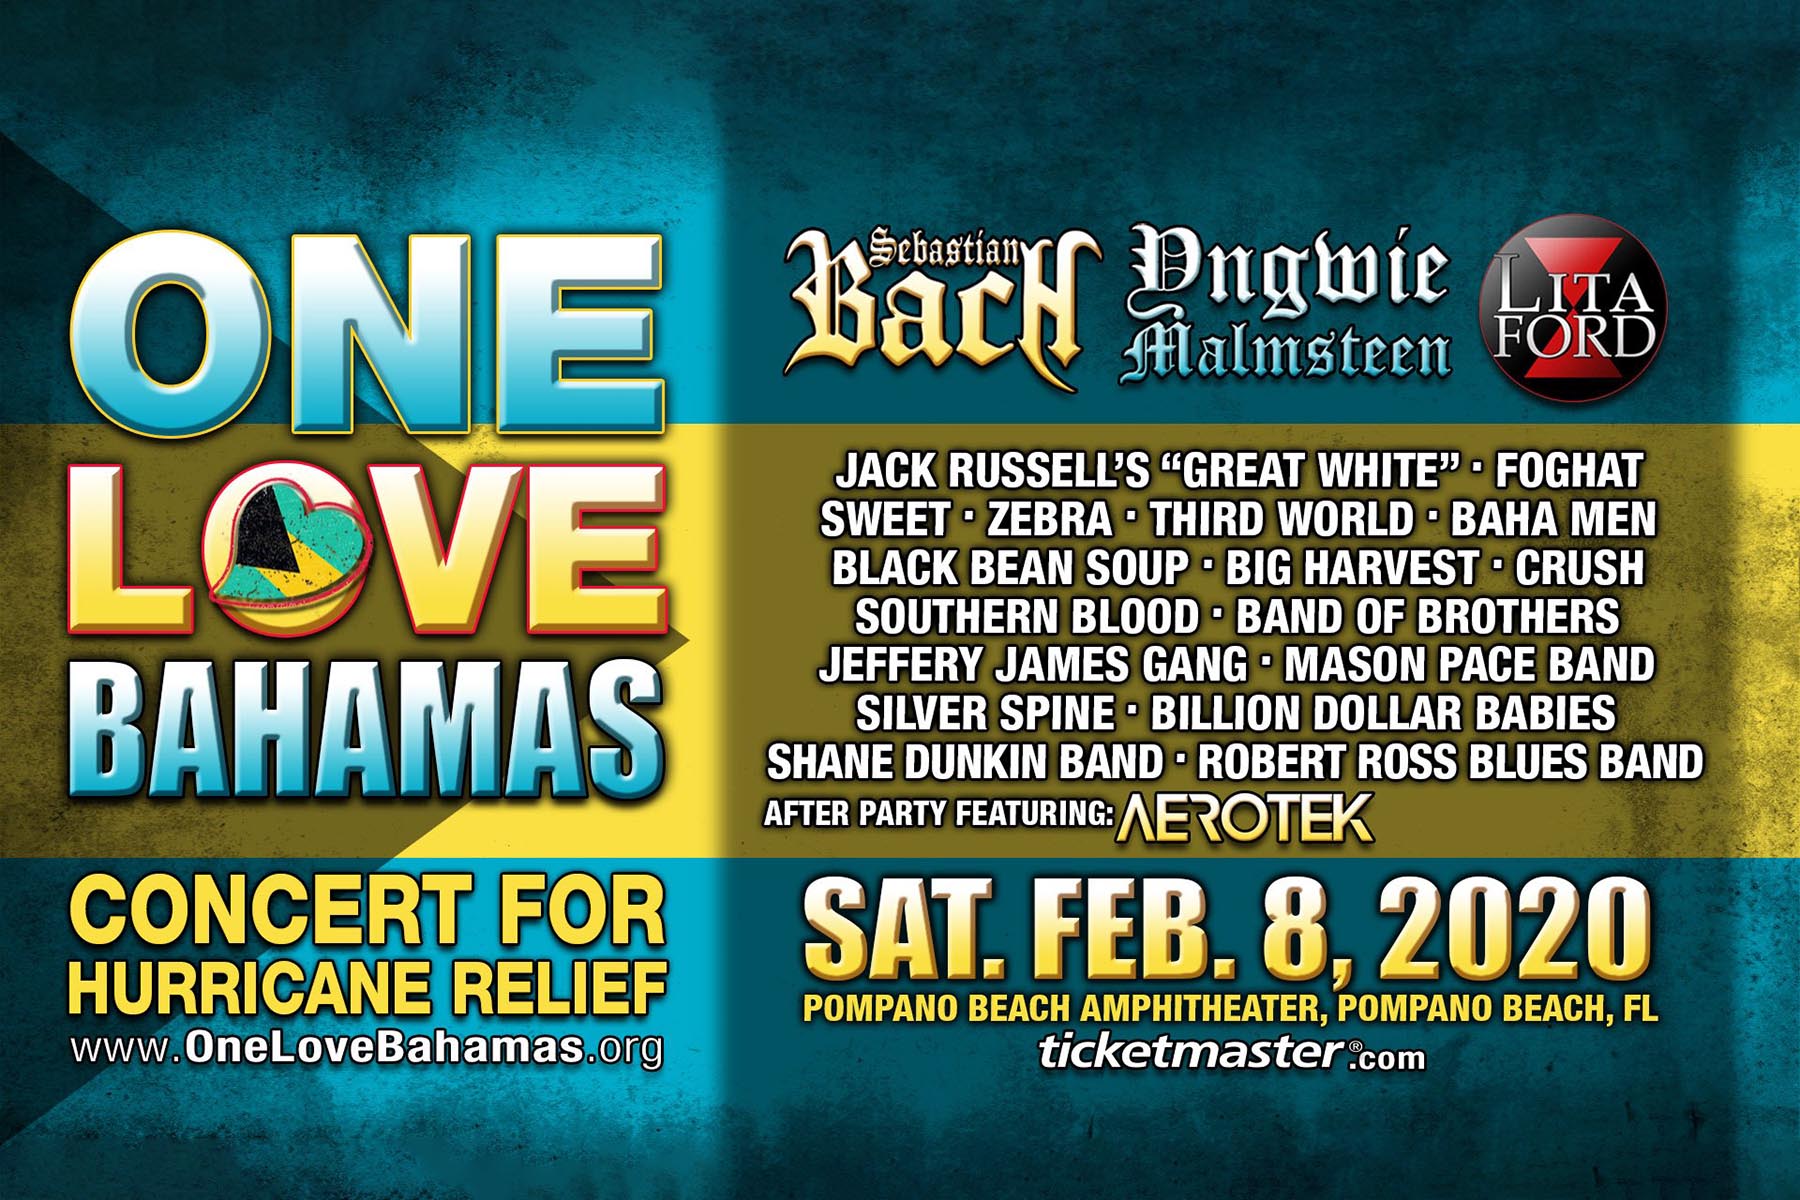 ONE LOVE BAHAMAS Benefit Concert Announced at South Florida's Pompano